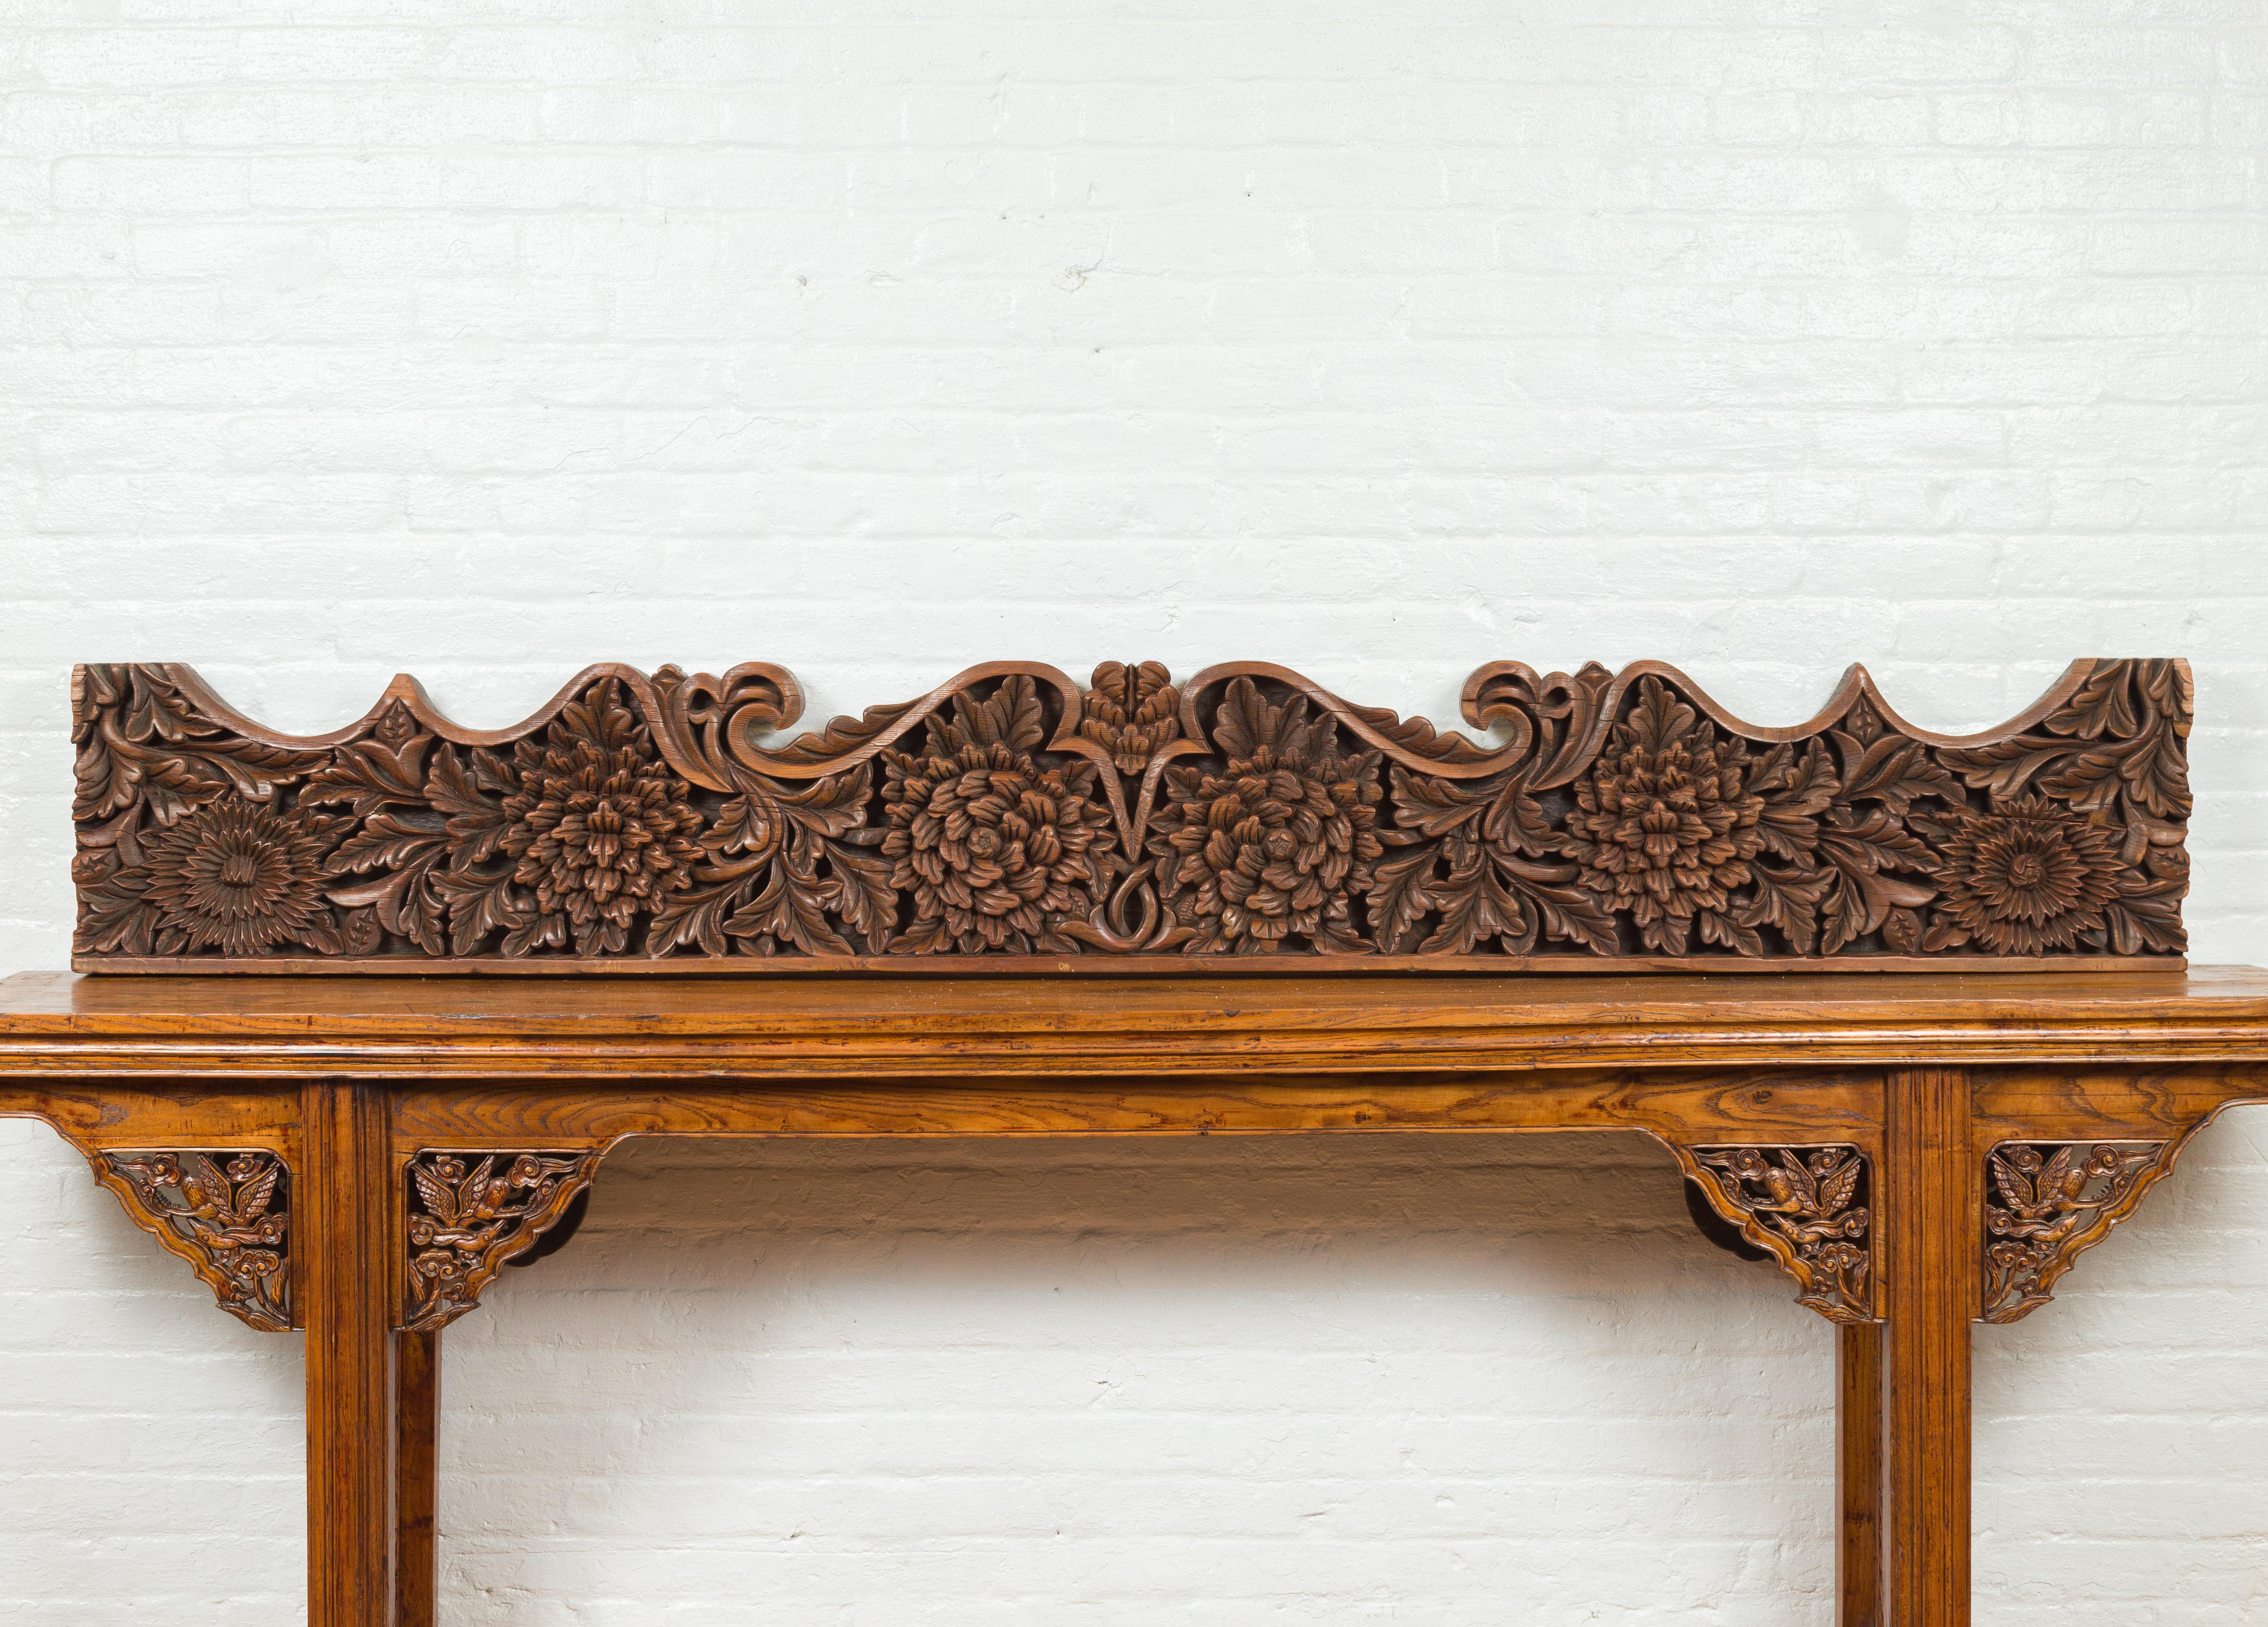 Antique Indonesian Carved Teak Architectural Panel with Floral and Foliage Decor For Sale 3